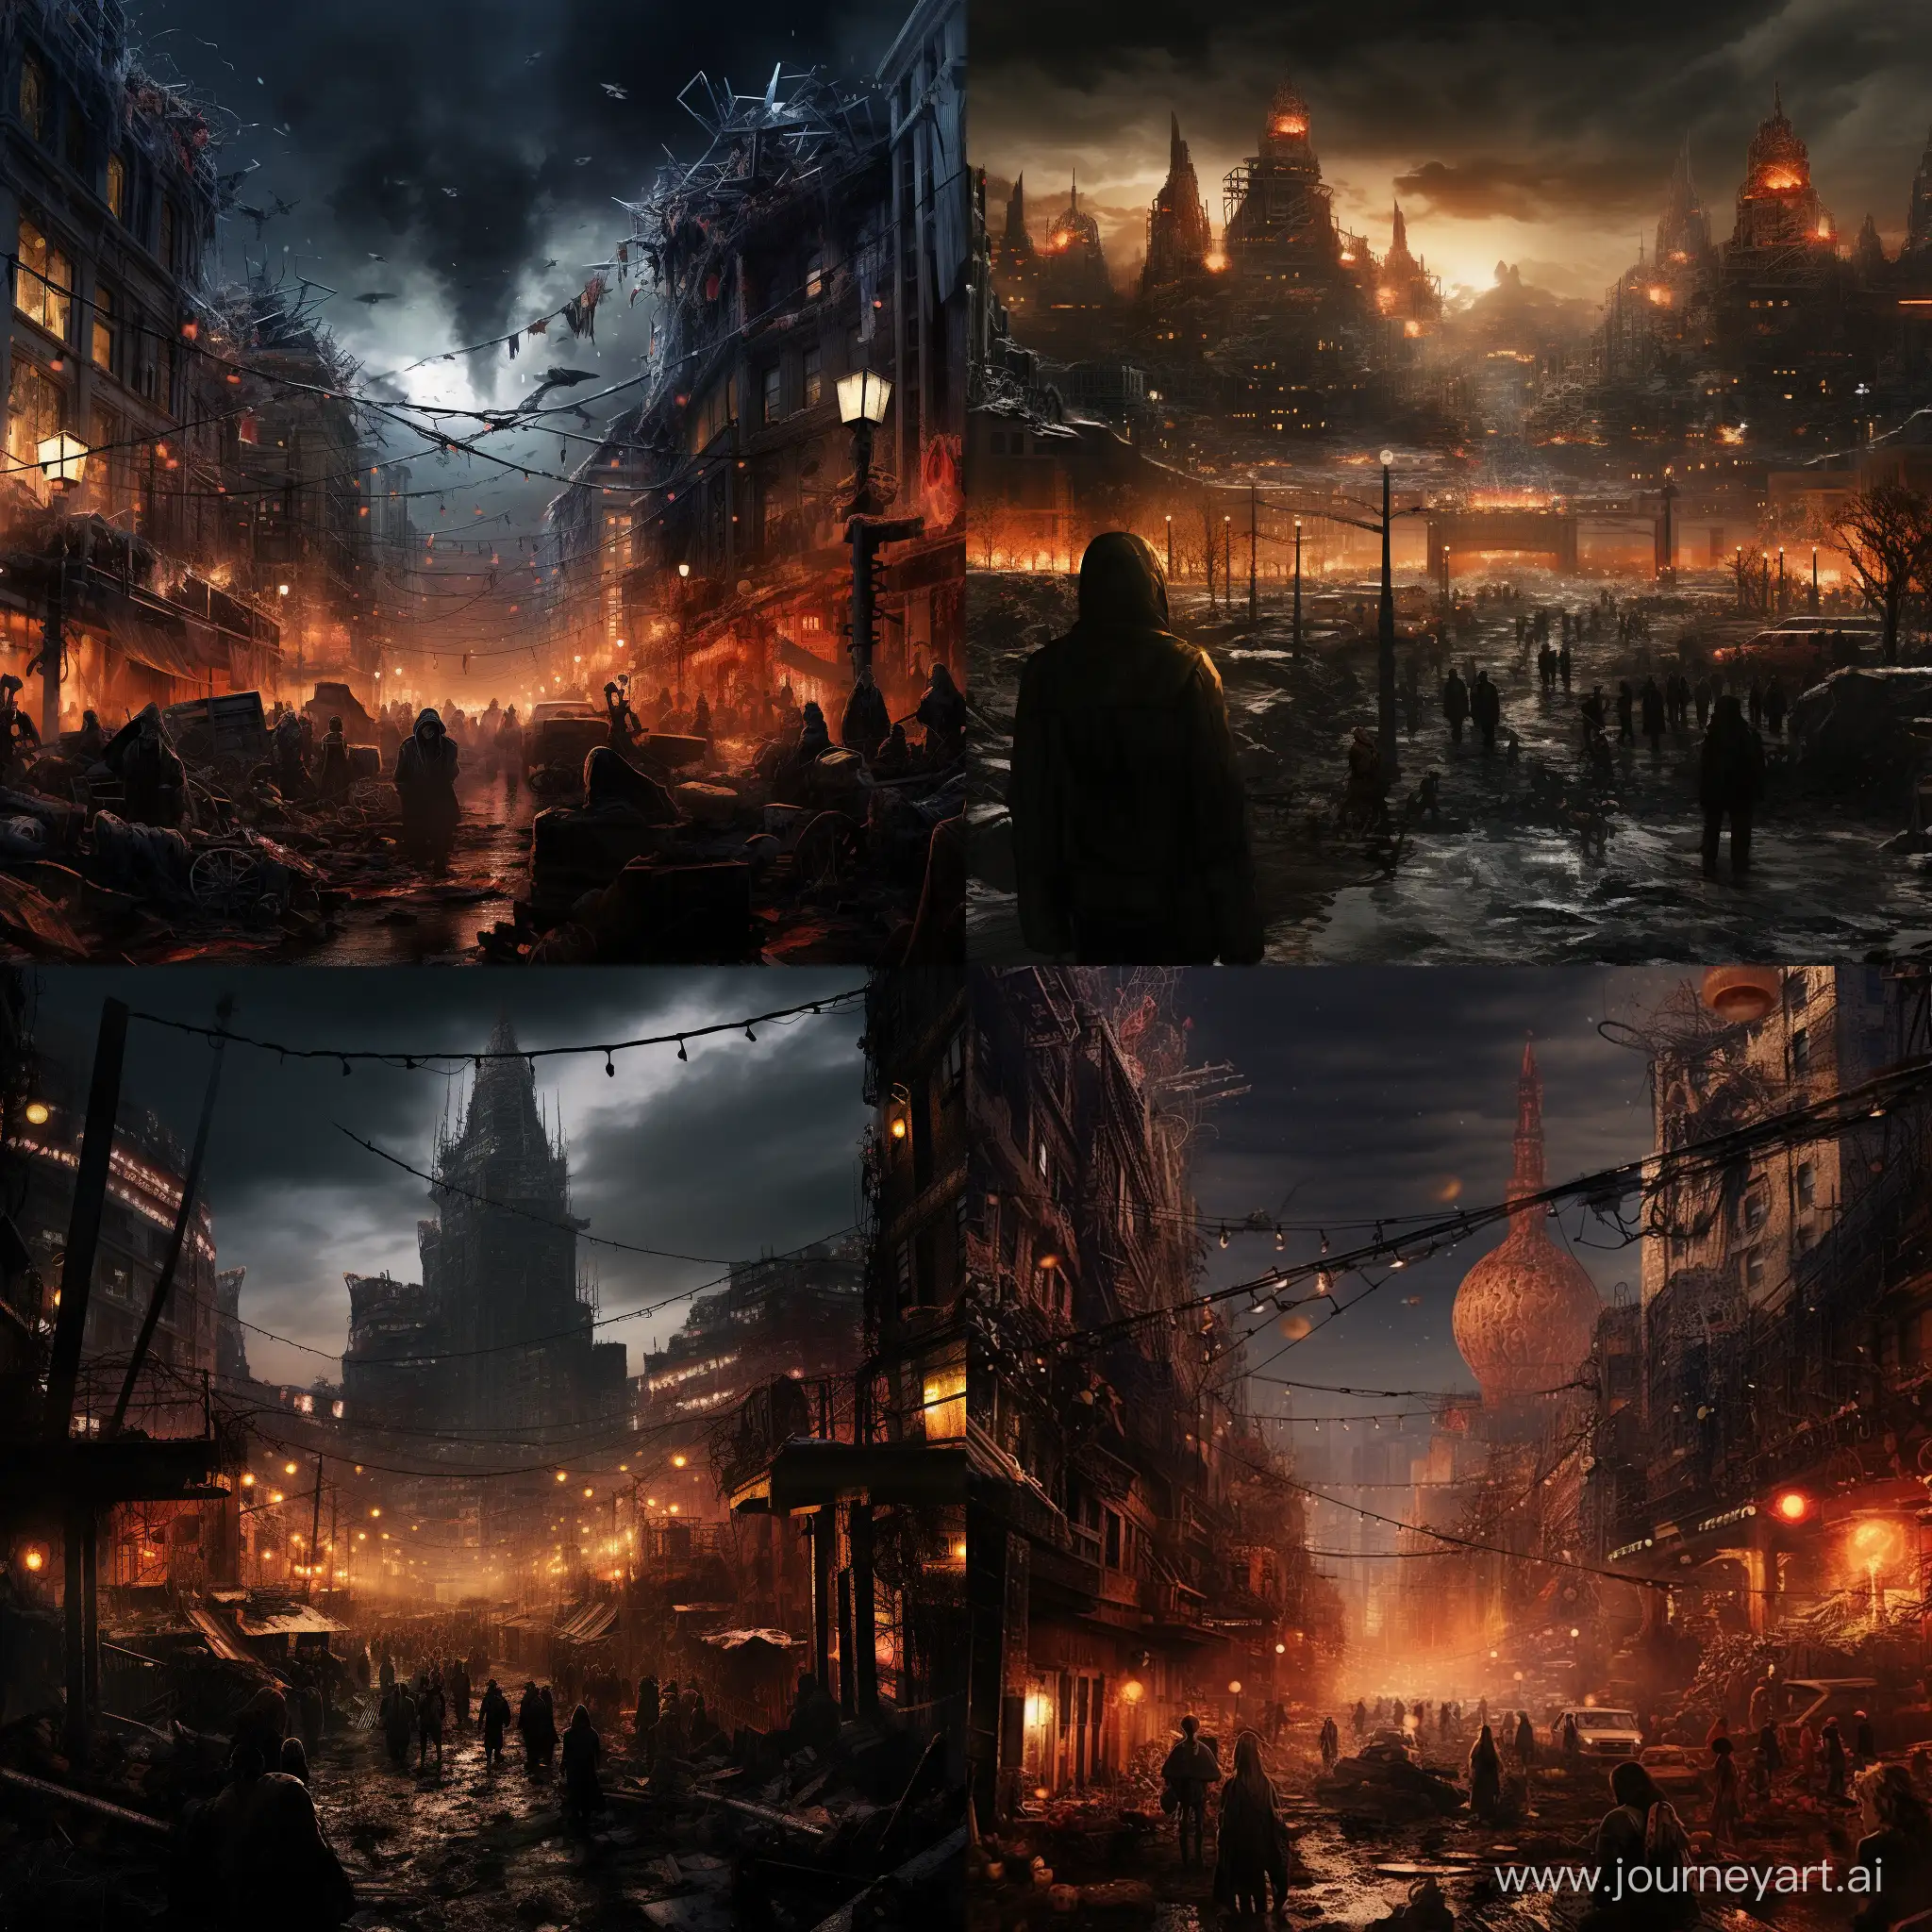 PostApocalyptic-New-Years-Eve-Art-in-a-Cityscape